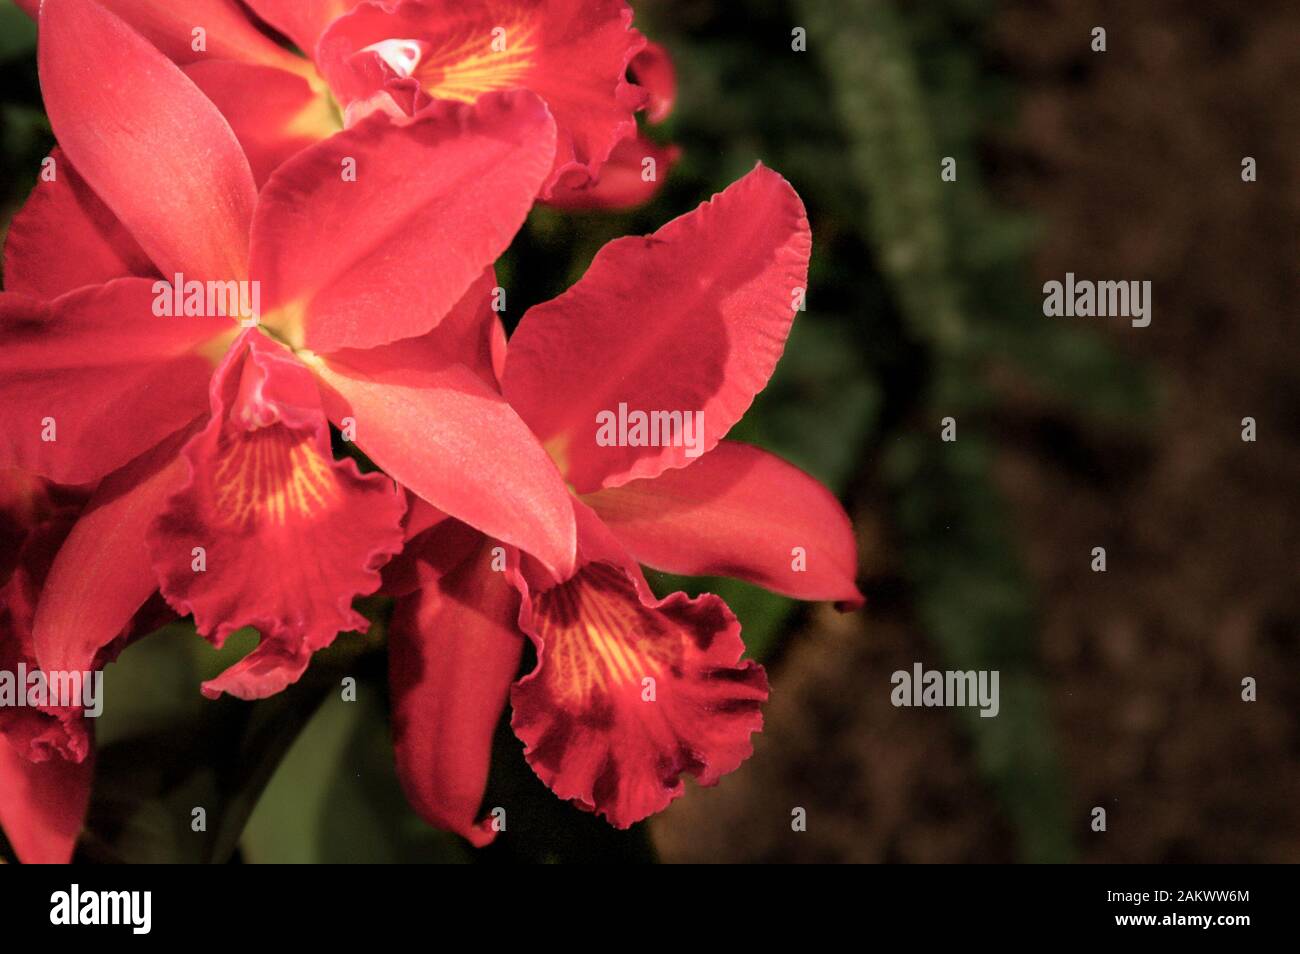 off center blood orange orchid cluster close up with soft background Stock Photo